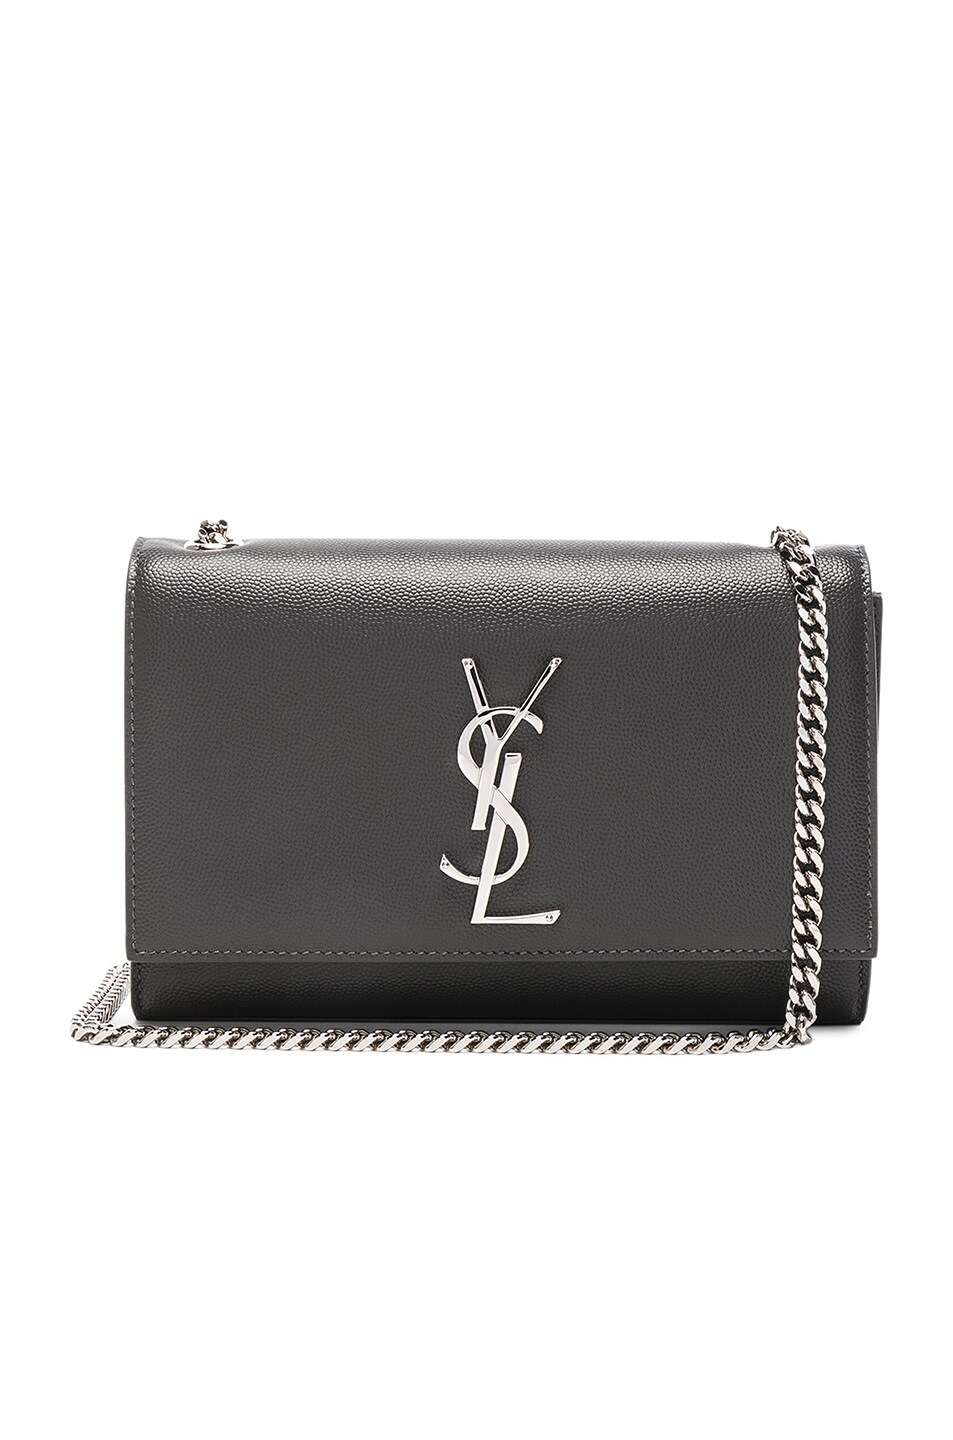 Image 1 of Saint Laurent Small Monogramme Kate Chain Bag in Storm